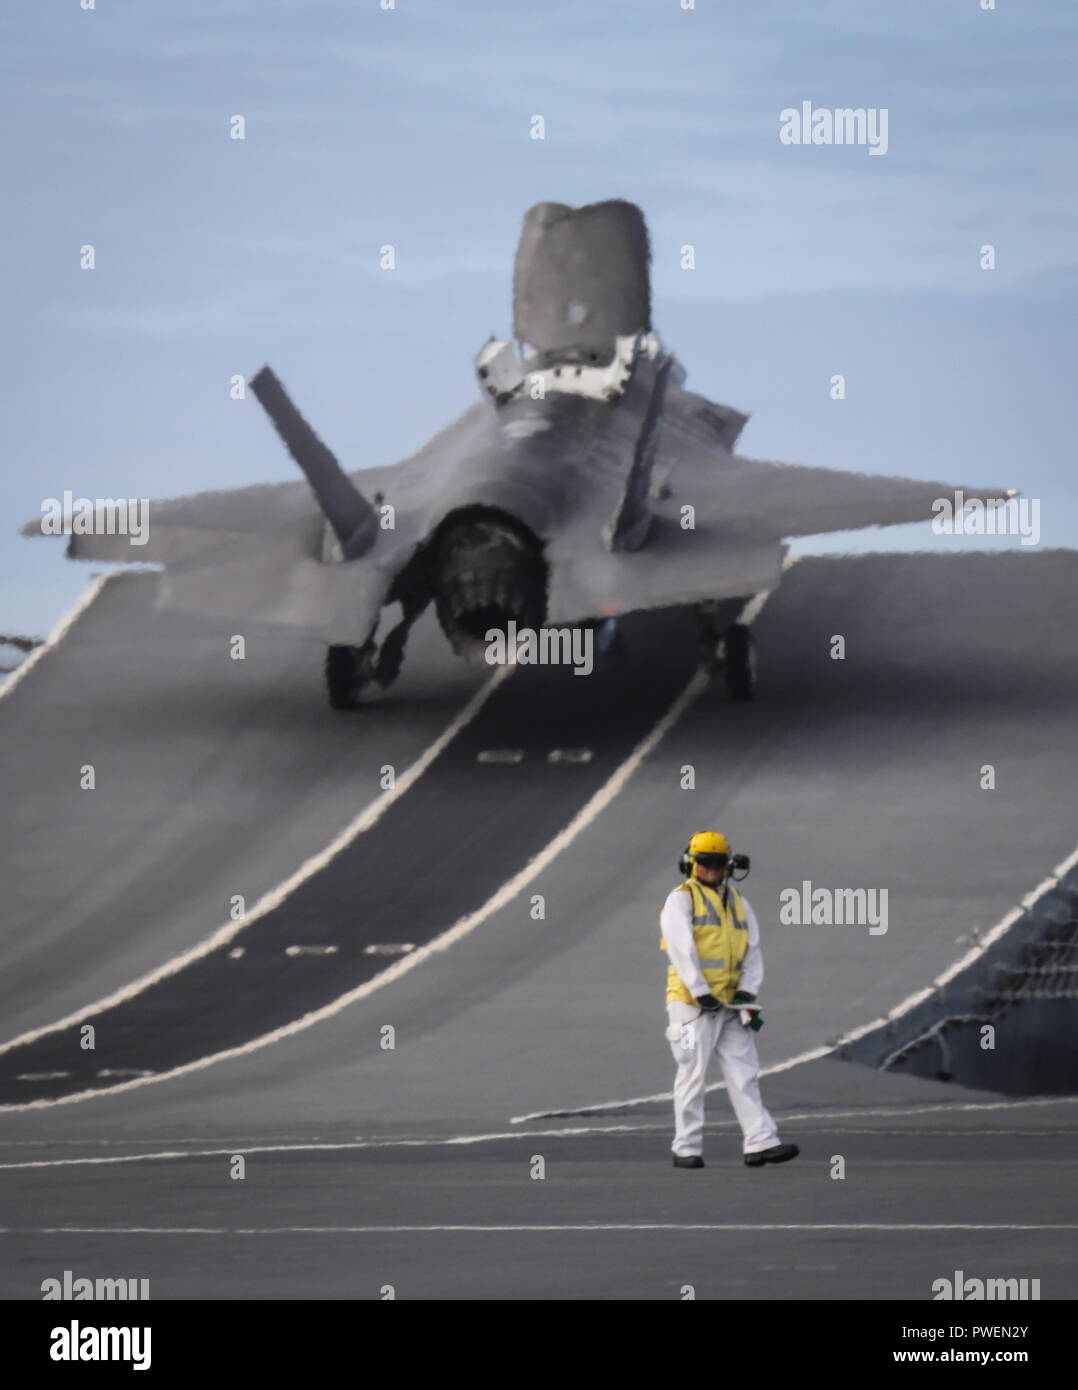 181006-N-N0101-221 NORTH ATLANTIC OCEAN (Oct. 6, 2018) An F-35B Lightning II assigned  to the F-35 Integrated Test Force at Naval Air Station Patuxent River, Md., launches from the Royal Navy aircraft carrier HMS Queen Elizabeth (R08). (U.S. Navy photo courtesy of the Royal Navy/Released) Stock Photo